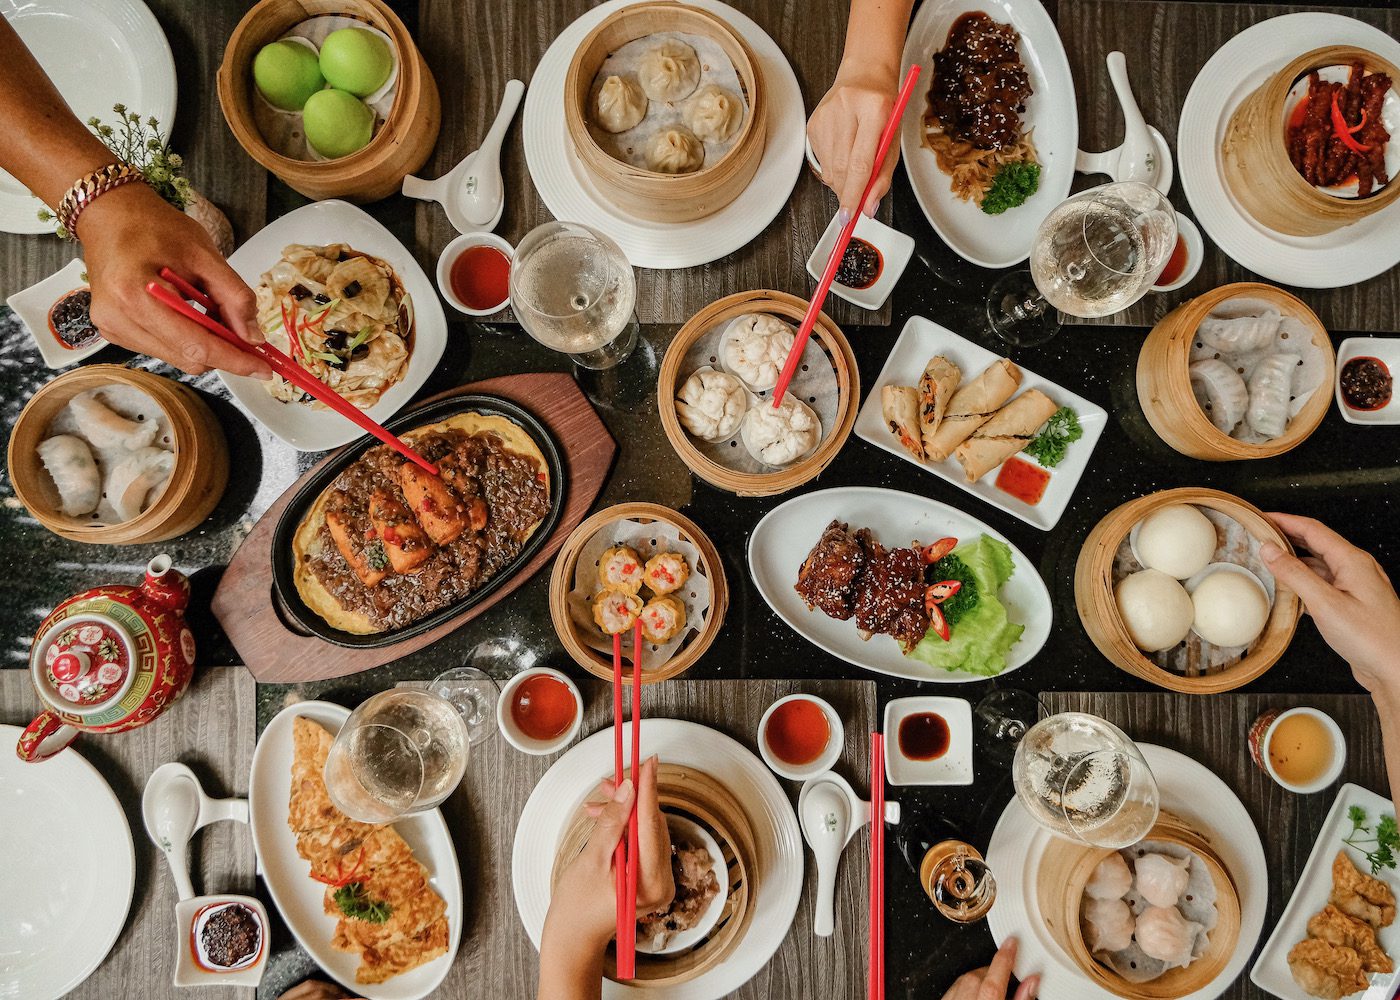 Chinese Street Food: Recreating the Vibrant Flavors at Chinese Restaurants